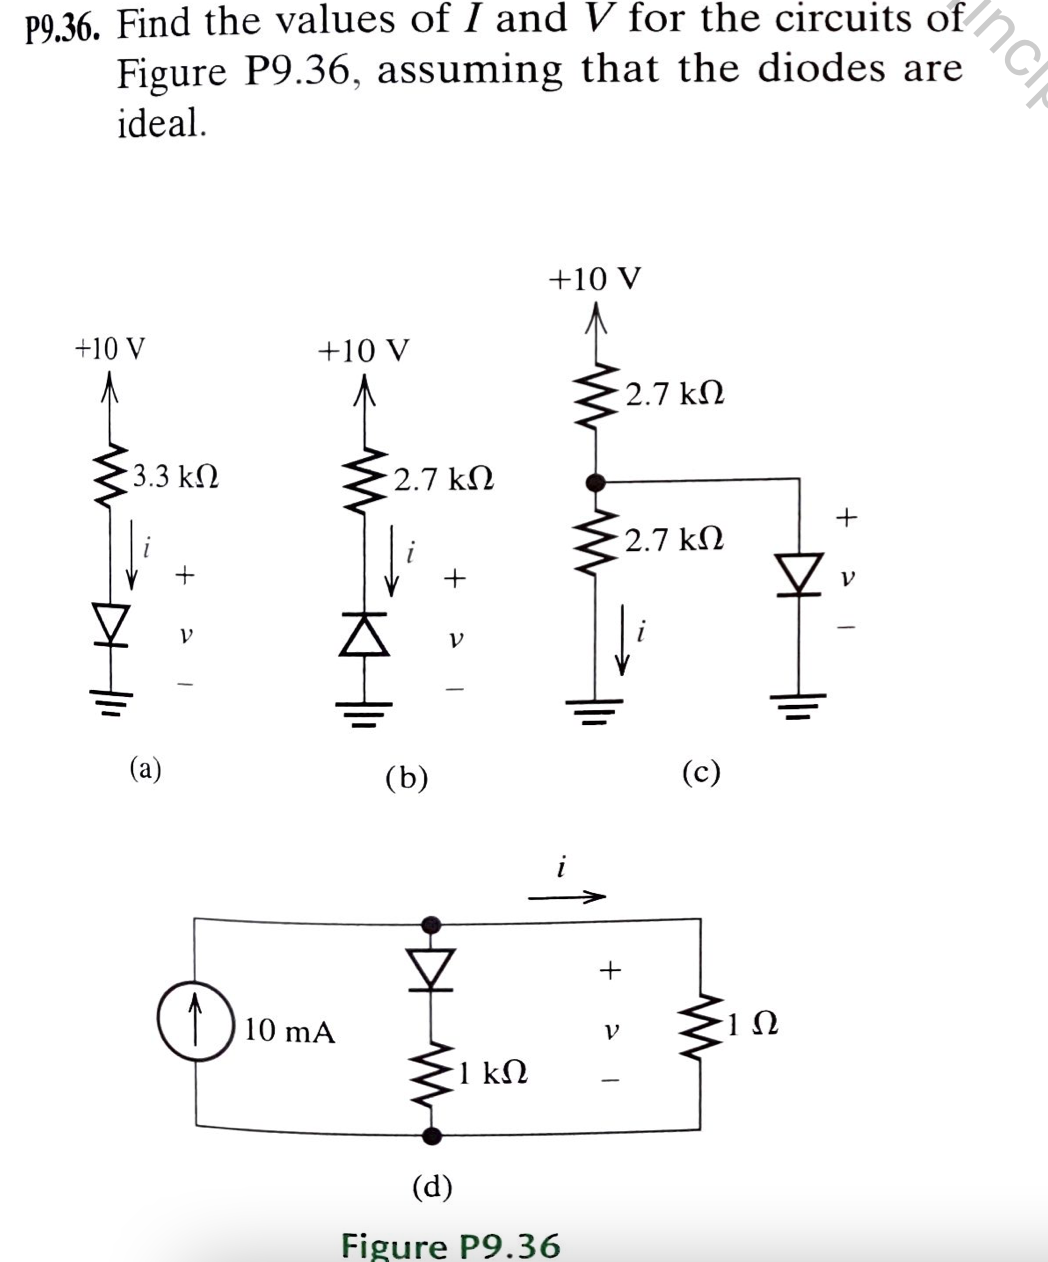 P9.36. Find the values of I and V for the circuits of
Figure P9.36, assuming that the diodes are
ideal.
+10 V
3.3 ΚΩ
@
+
T
O
+10 V
110 mA
2.7 ΚΩ
(b)
+
V
▷
1 ΚΩ
+10 V
-↑
(d)
Figure P9.36
- 2.7 ΚΩ
+
V
2.7 ΚΩ
(c)
Min
1 Ω
+
V
nc